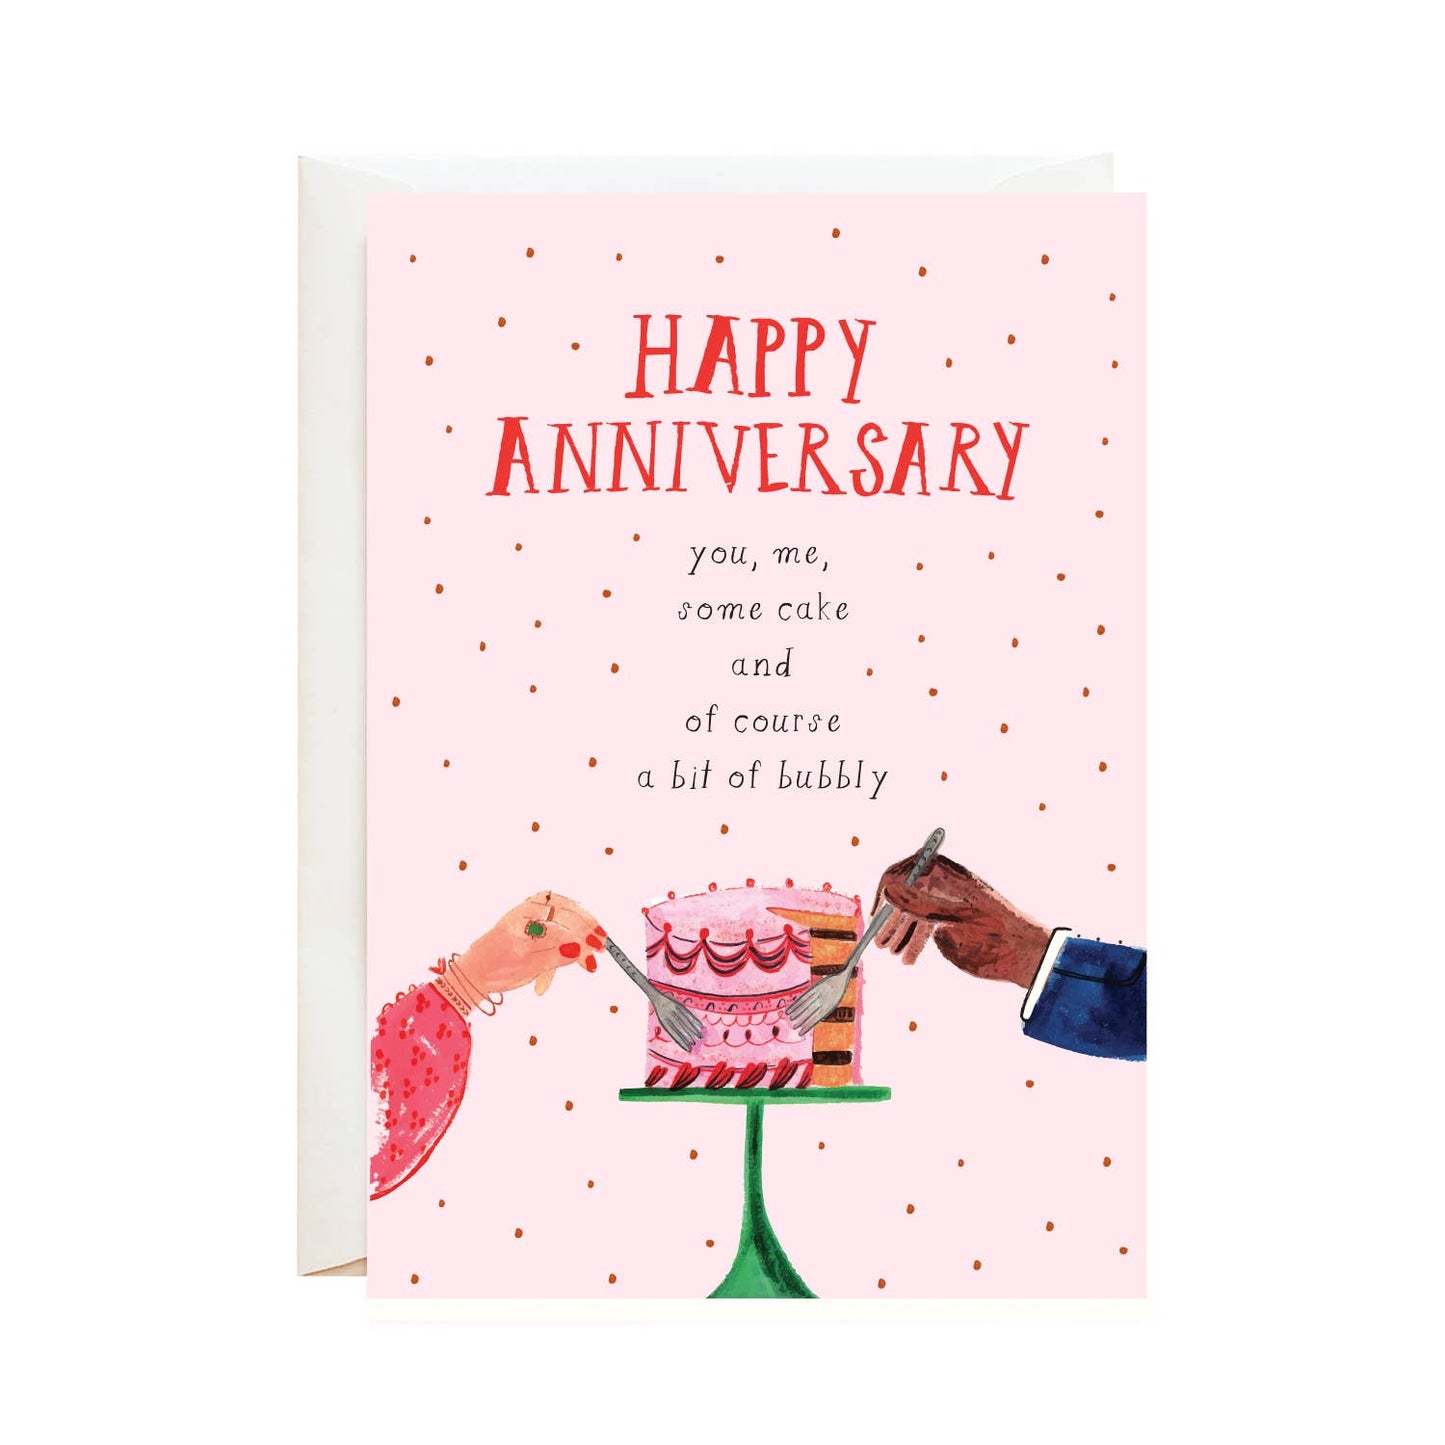 Anniversary greeting card -- reads "Happy Anniversary. You, me, some cake and of course a bit of bubbly" with two hands reaching for cake  